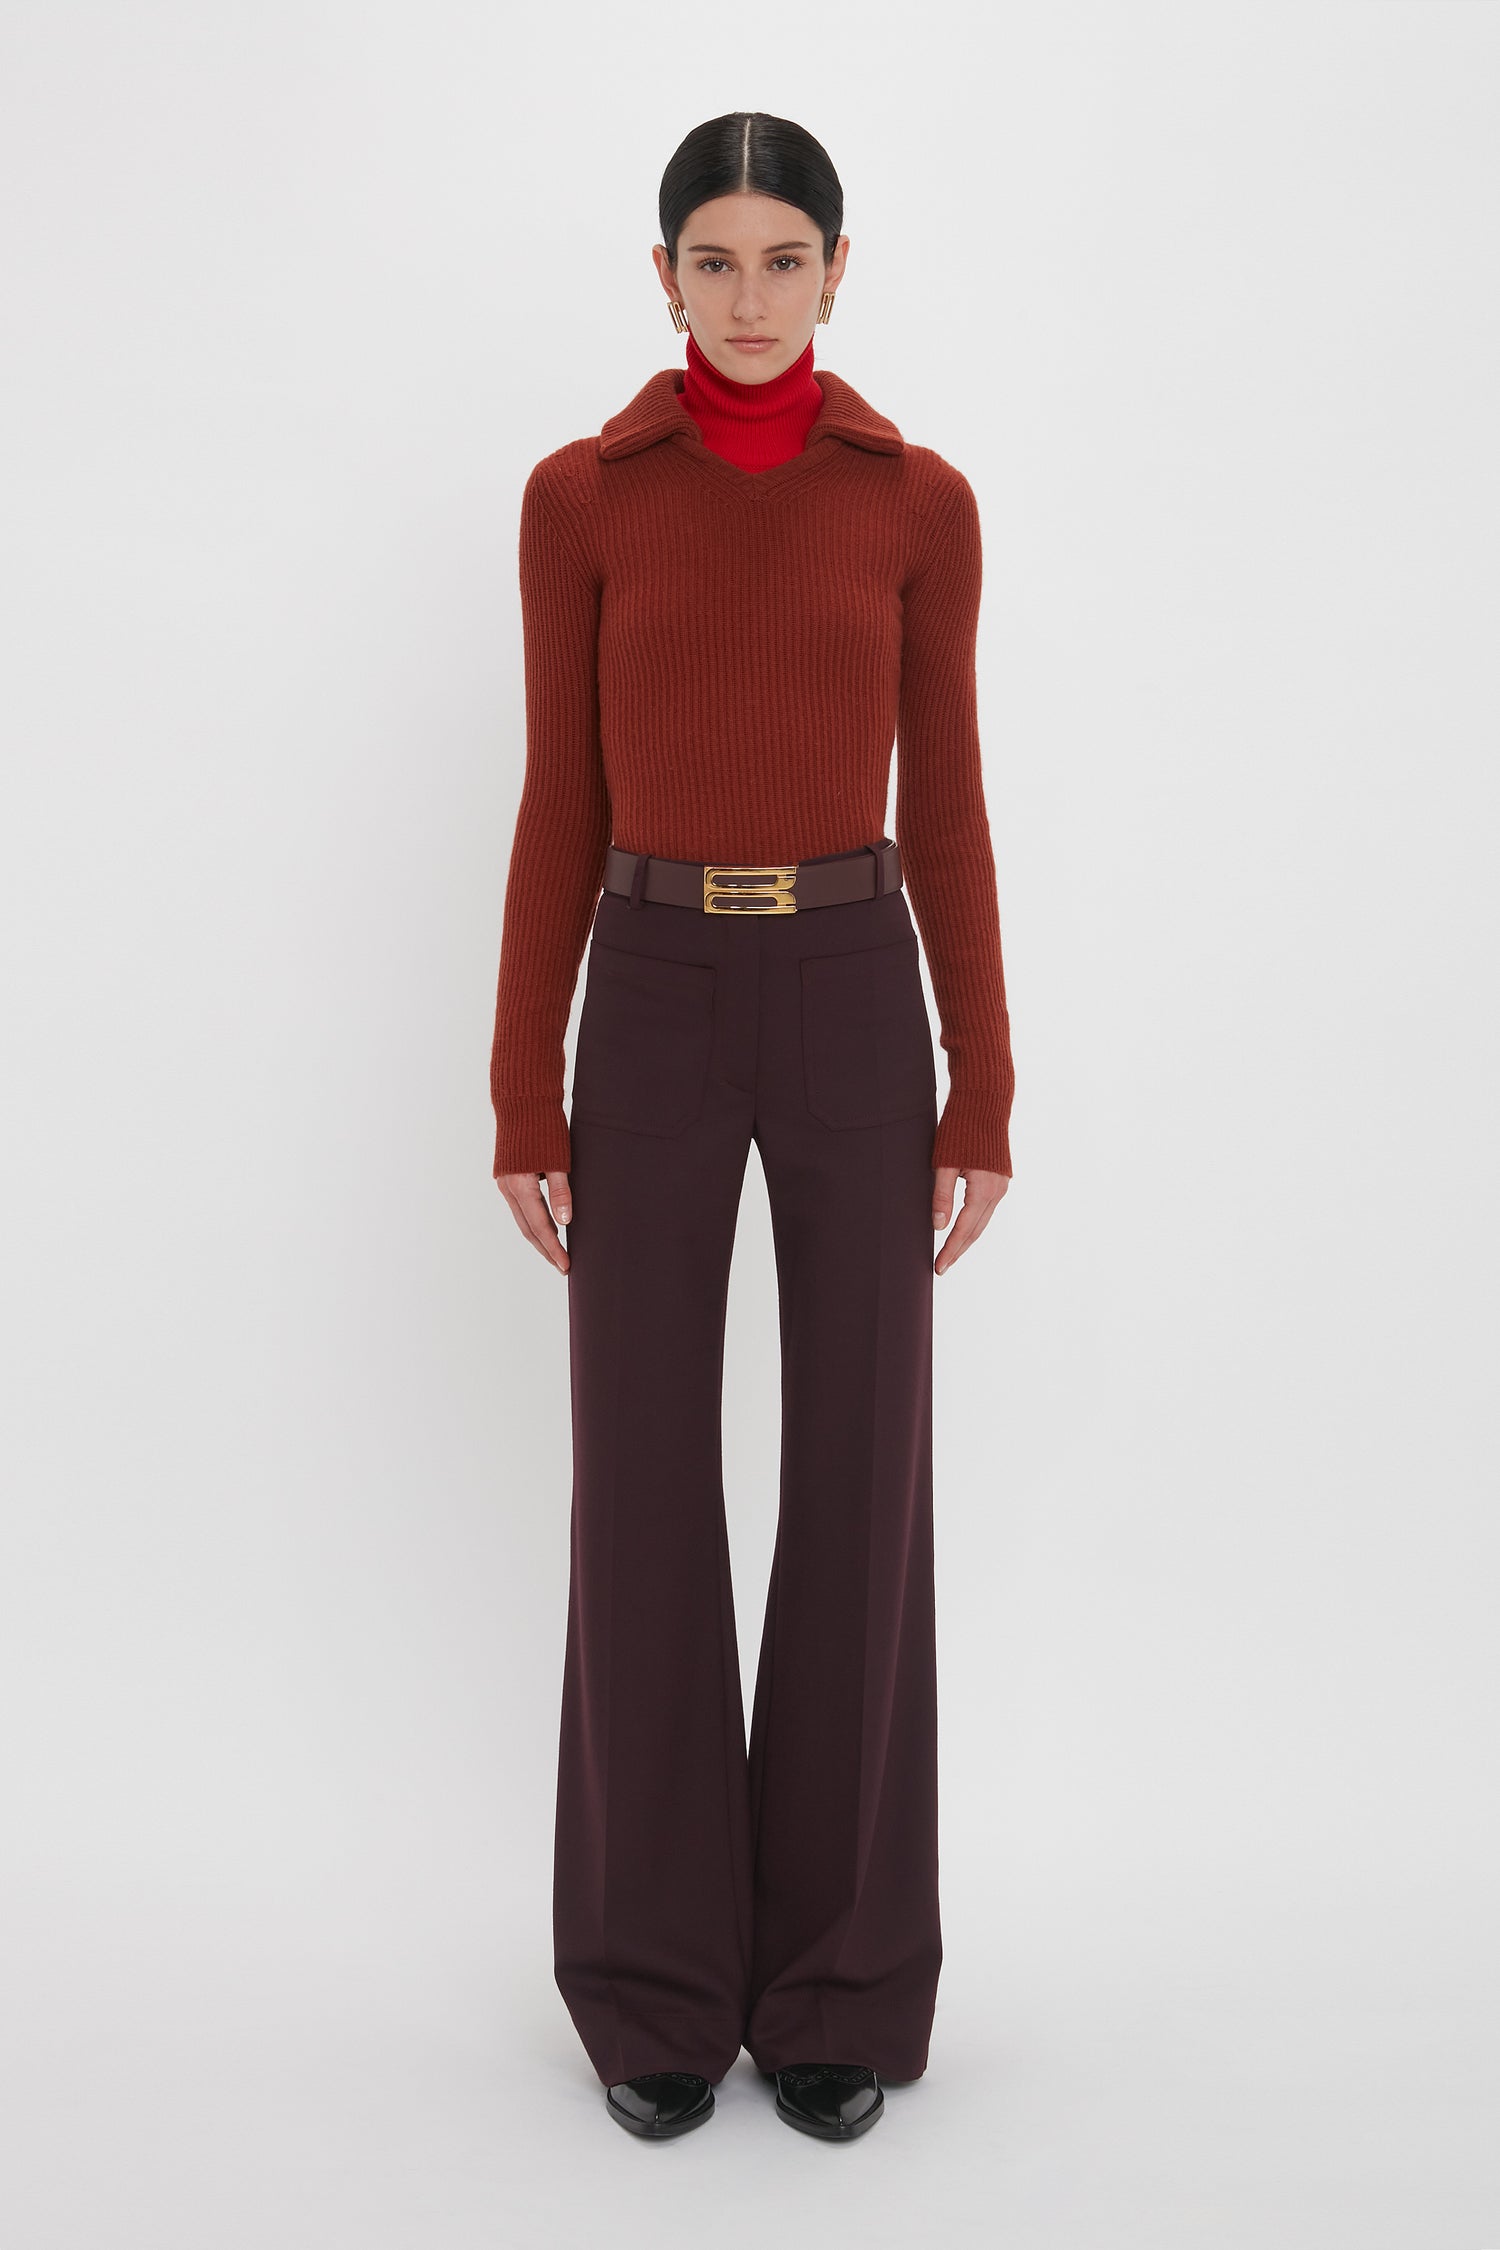 Person wearing a rust-colored Victoria Beckham Double Collared Jumper In Russet, red turtleneck, wide-legged purple pants, and a large belt with a gold buckle, standing against a white background.